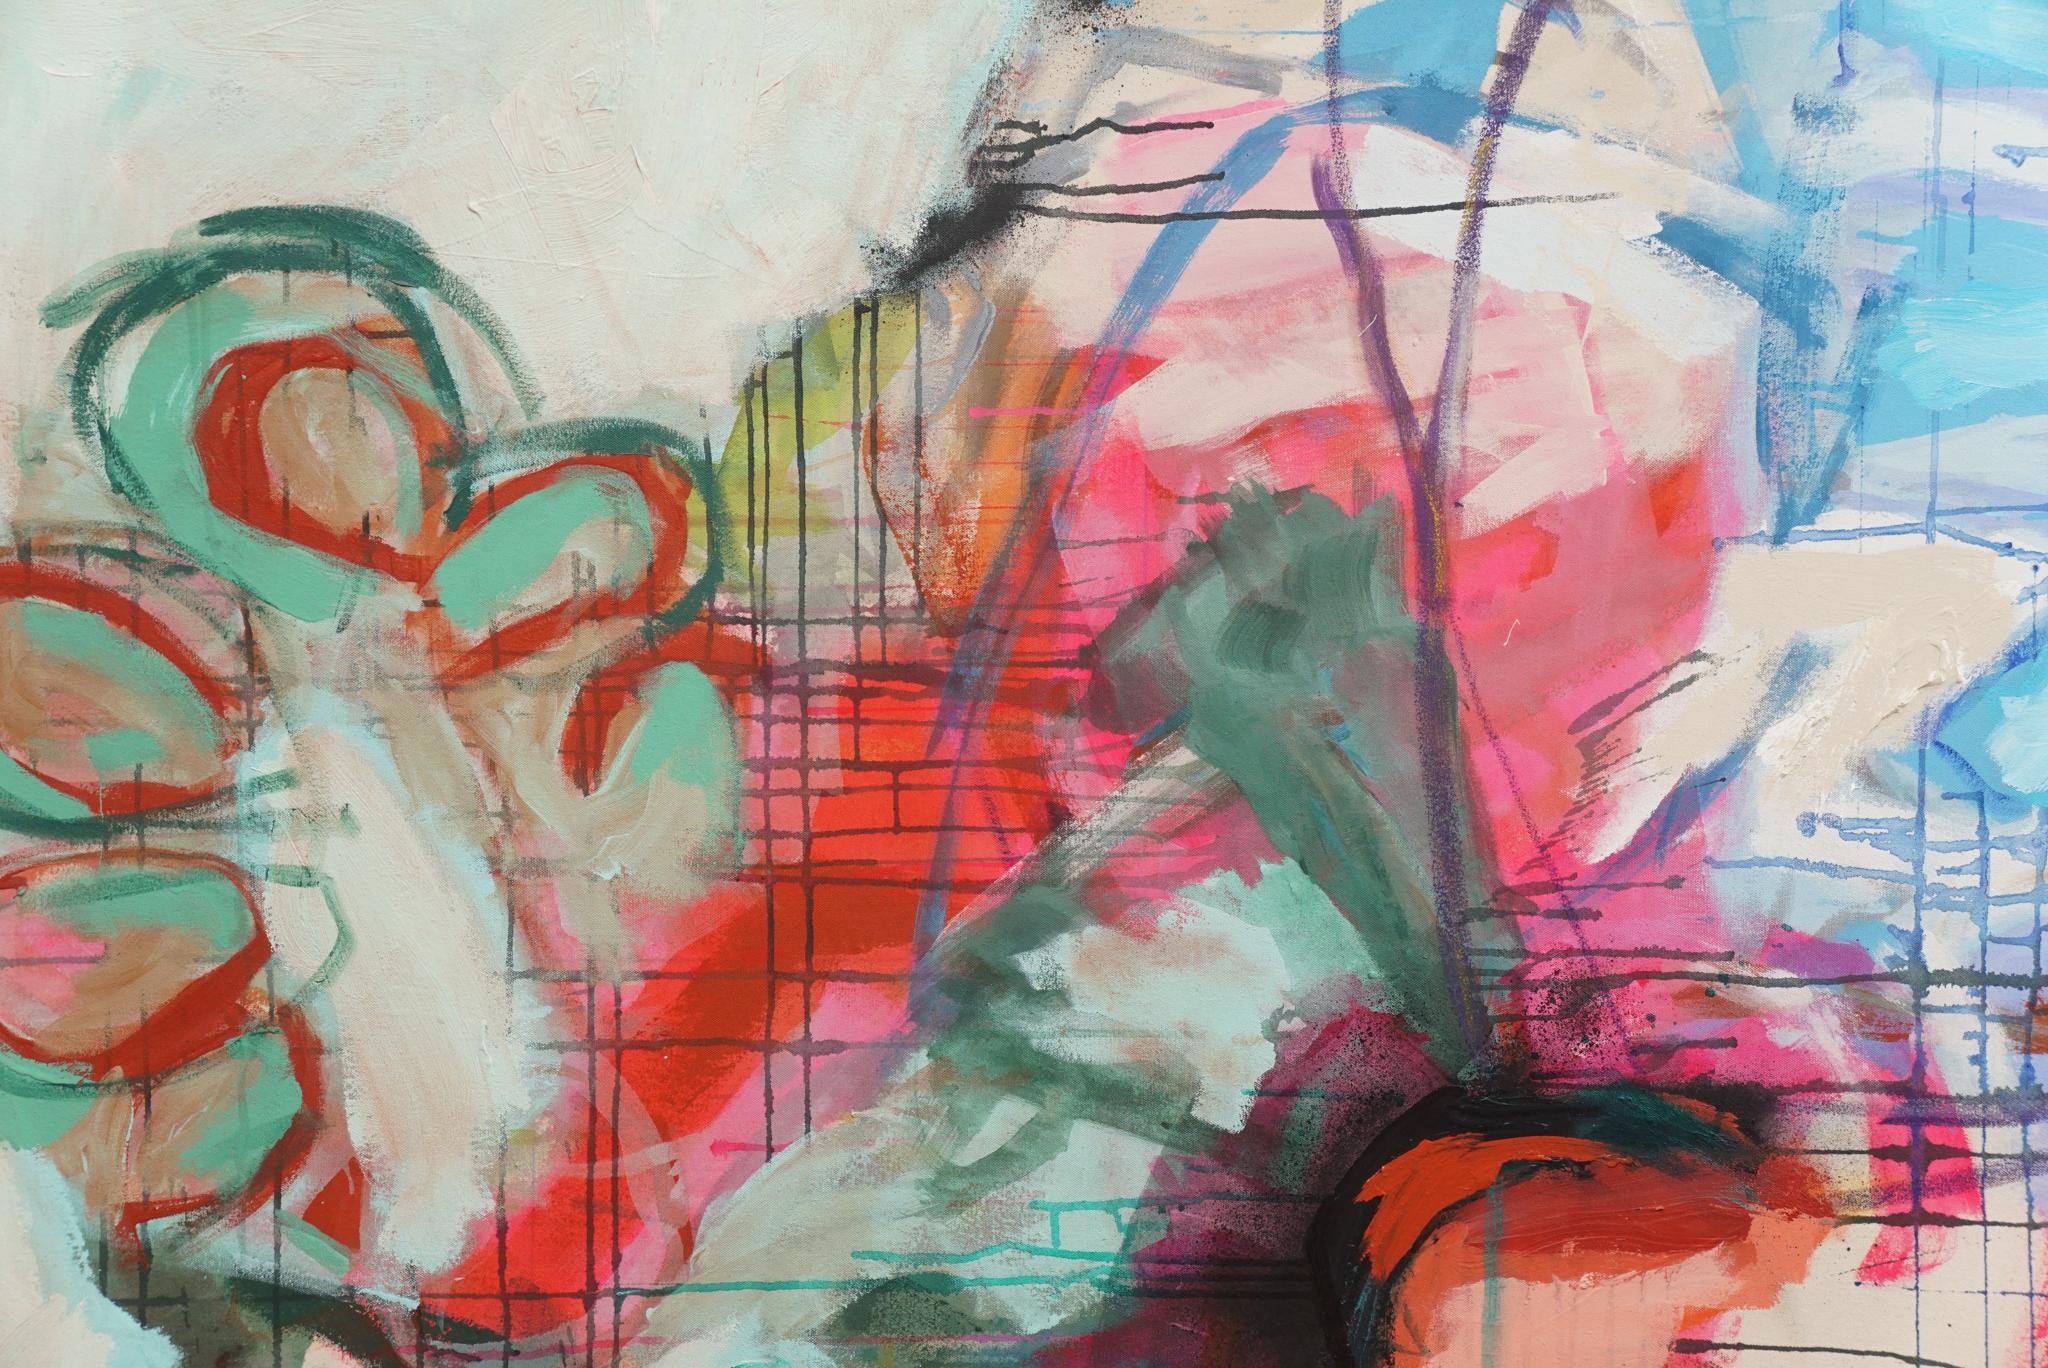 The abstract paintings of Ethan Boisvert often begin with a random sketch and find form and narrative through an overlay of direct painting, drips, homemade print making techniques and stencils. 